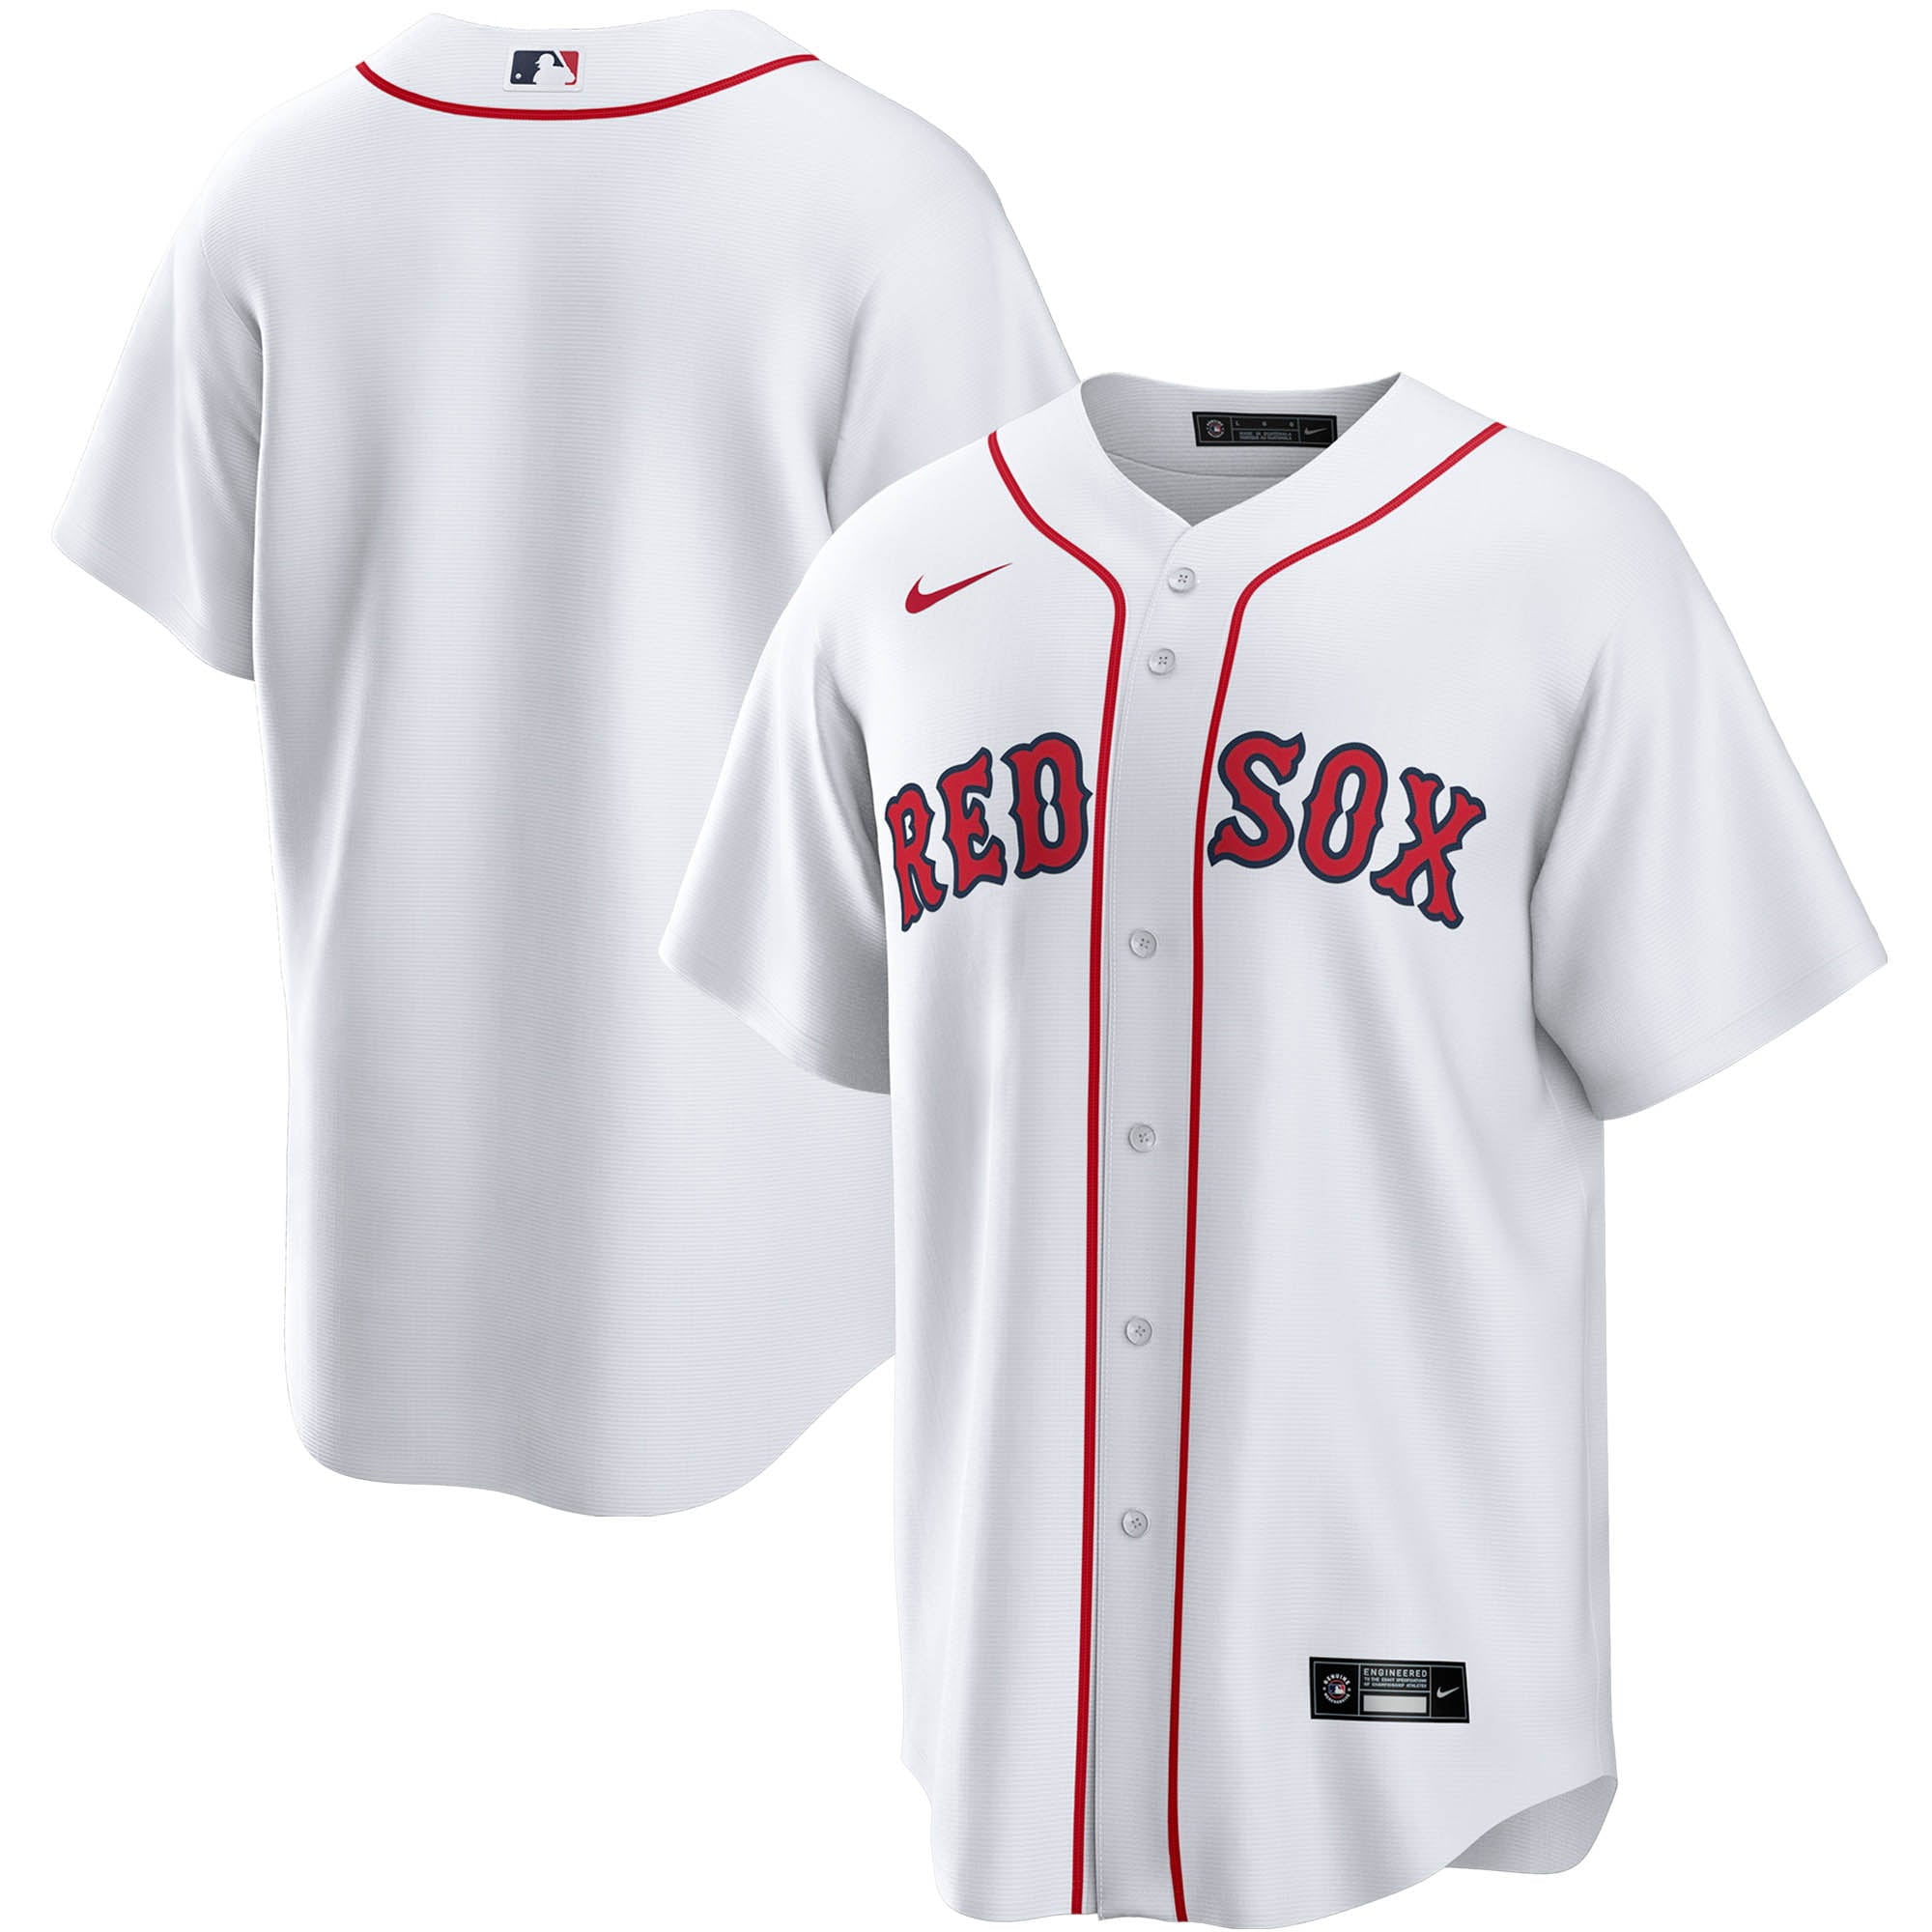 red sox grey jersey